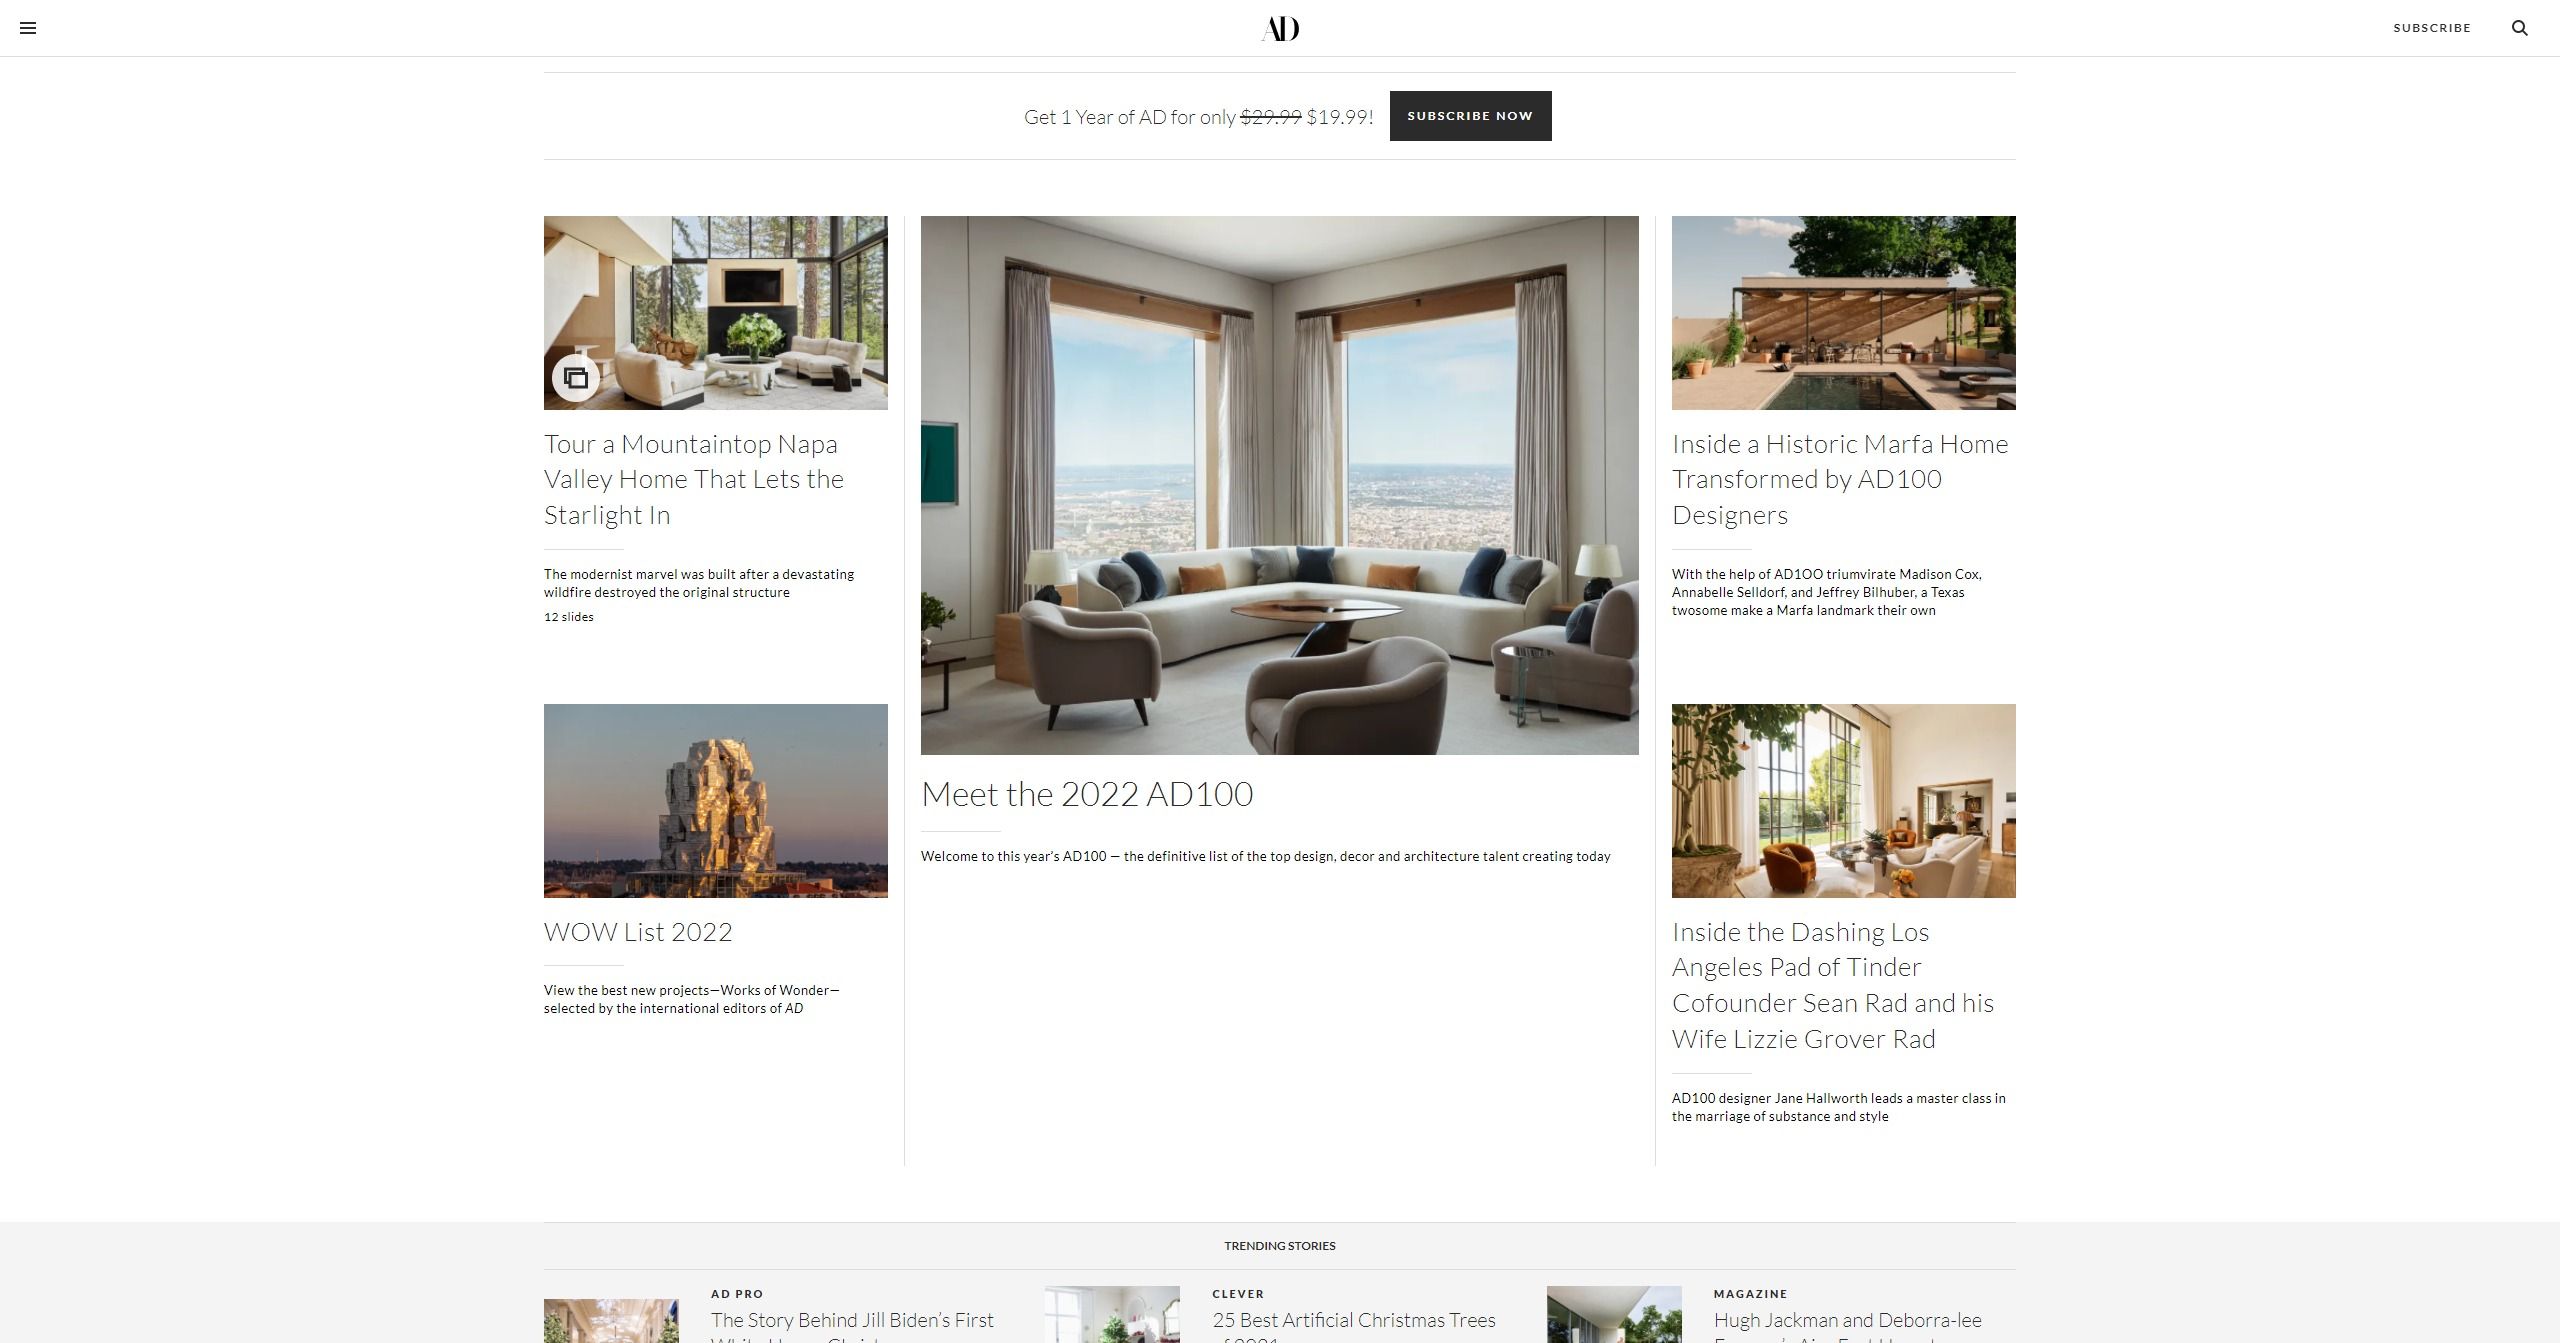 Screenshot of Architectural Digest's home page